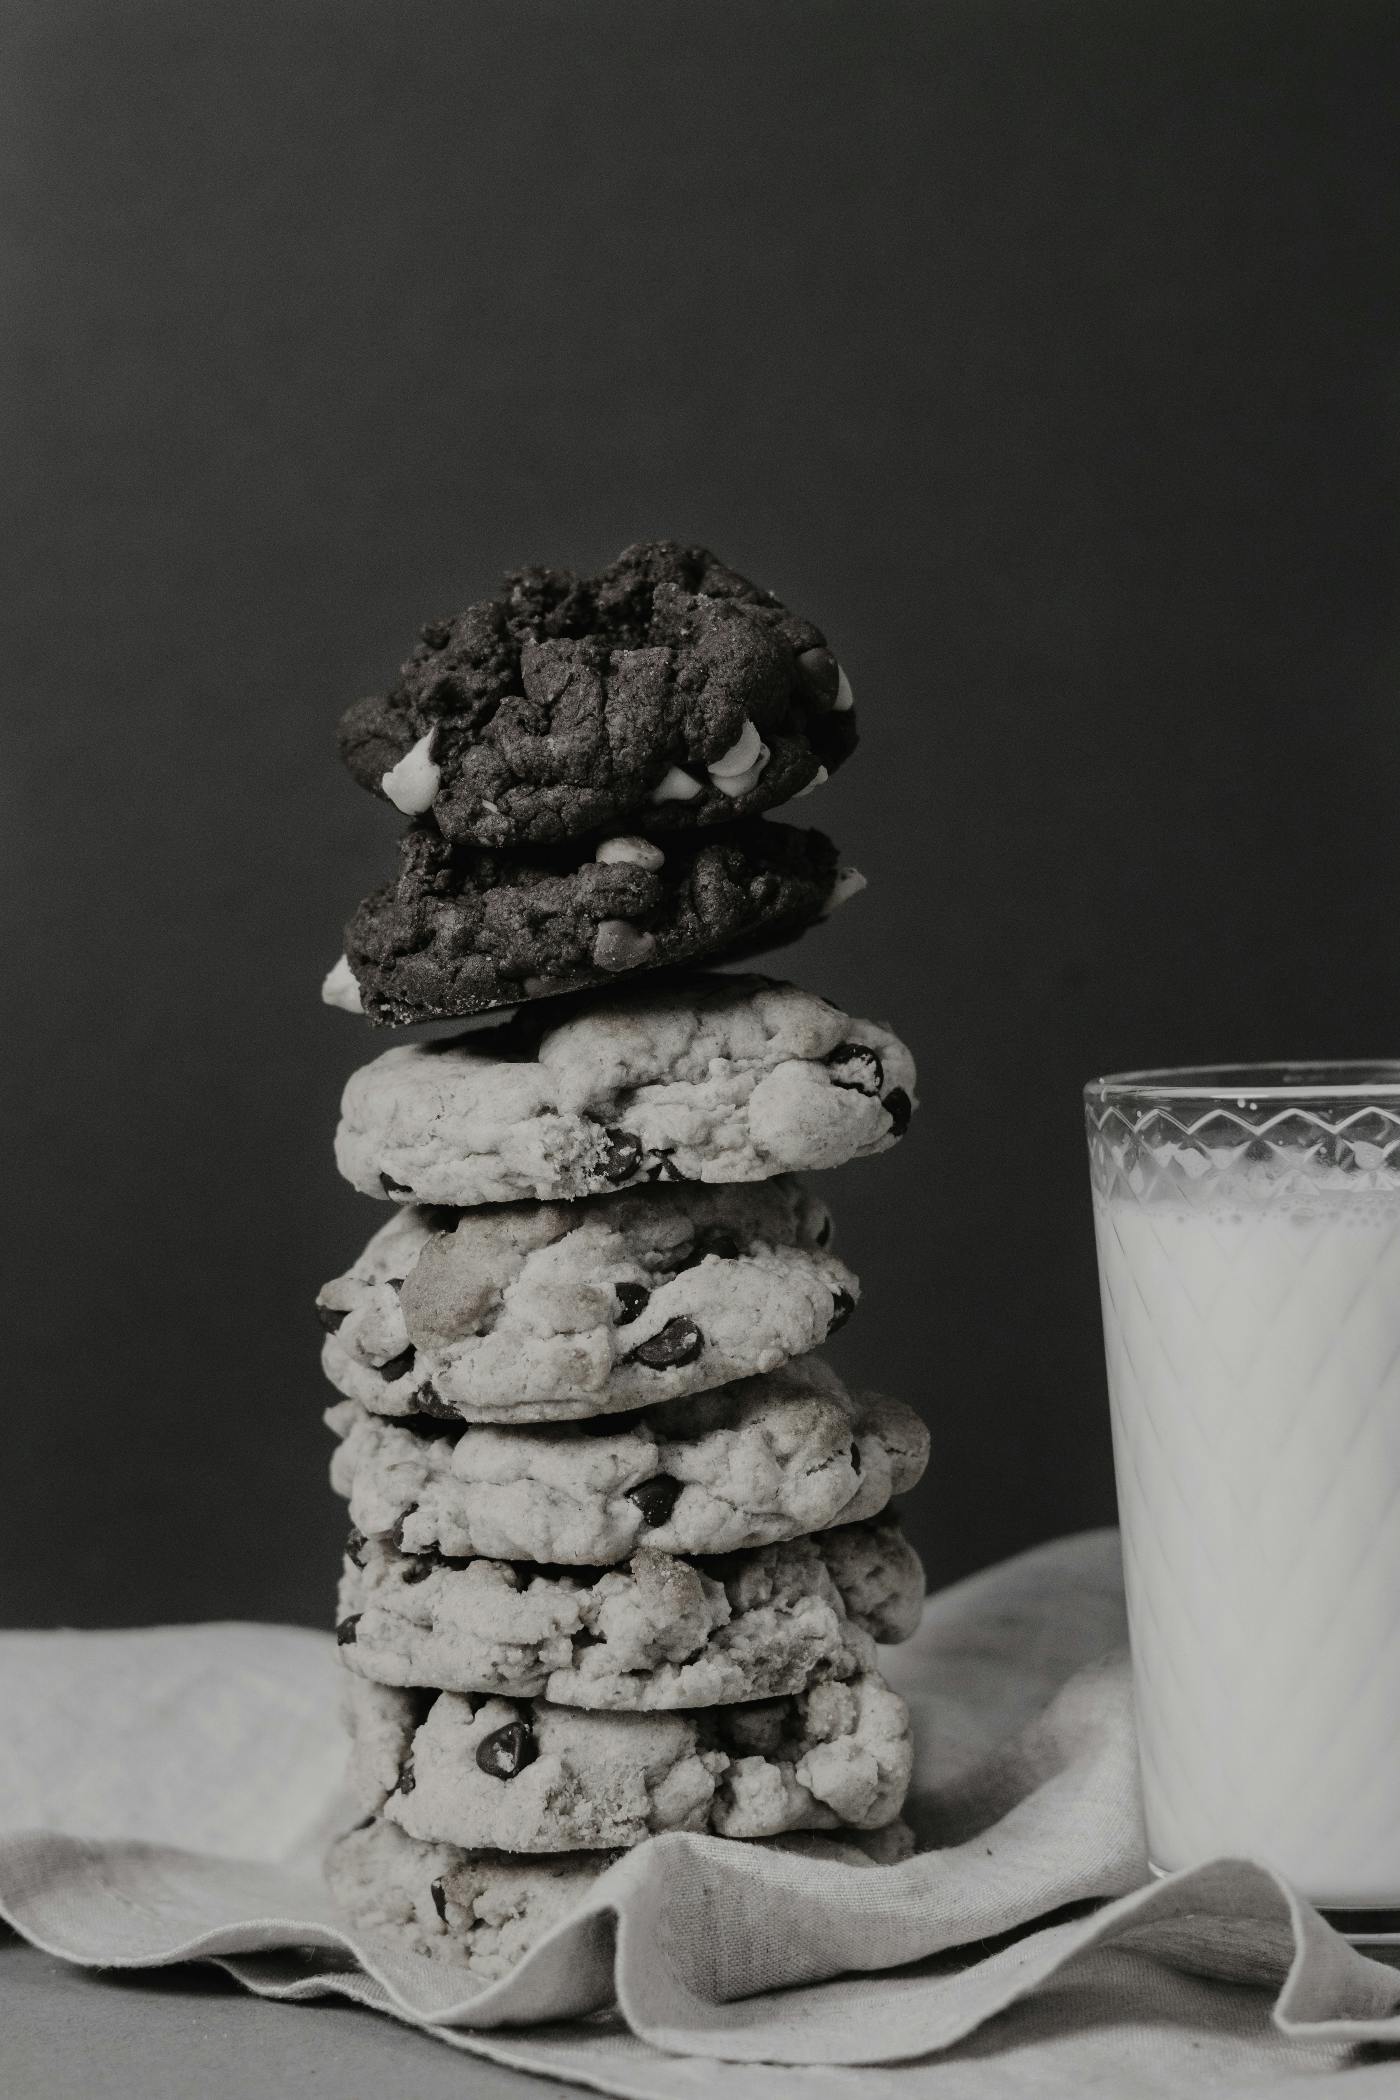 A stack of cookies next to a glass of milk